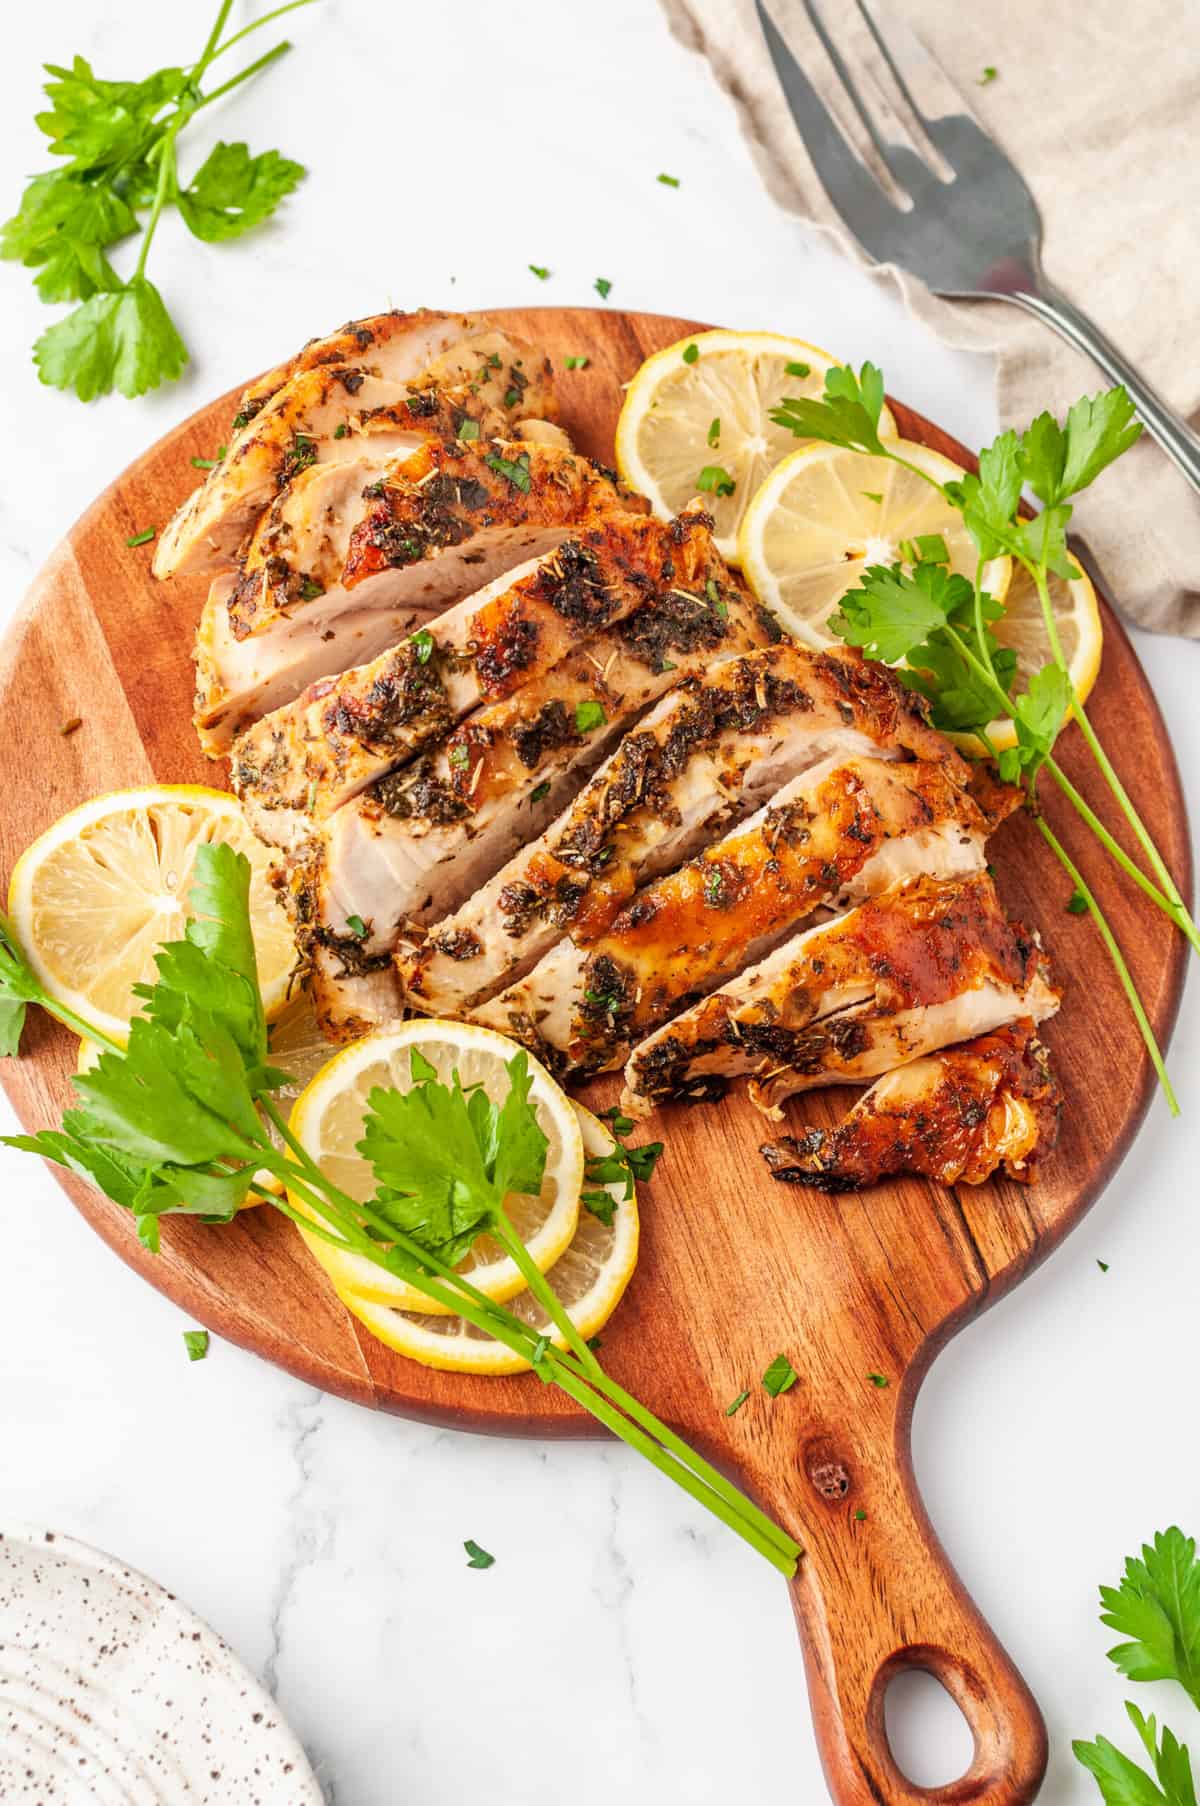 sliced air fryer turkey breast served on a wooden round board with lemon slices and parsley on the side